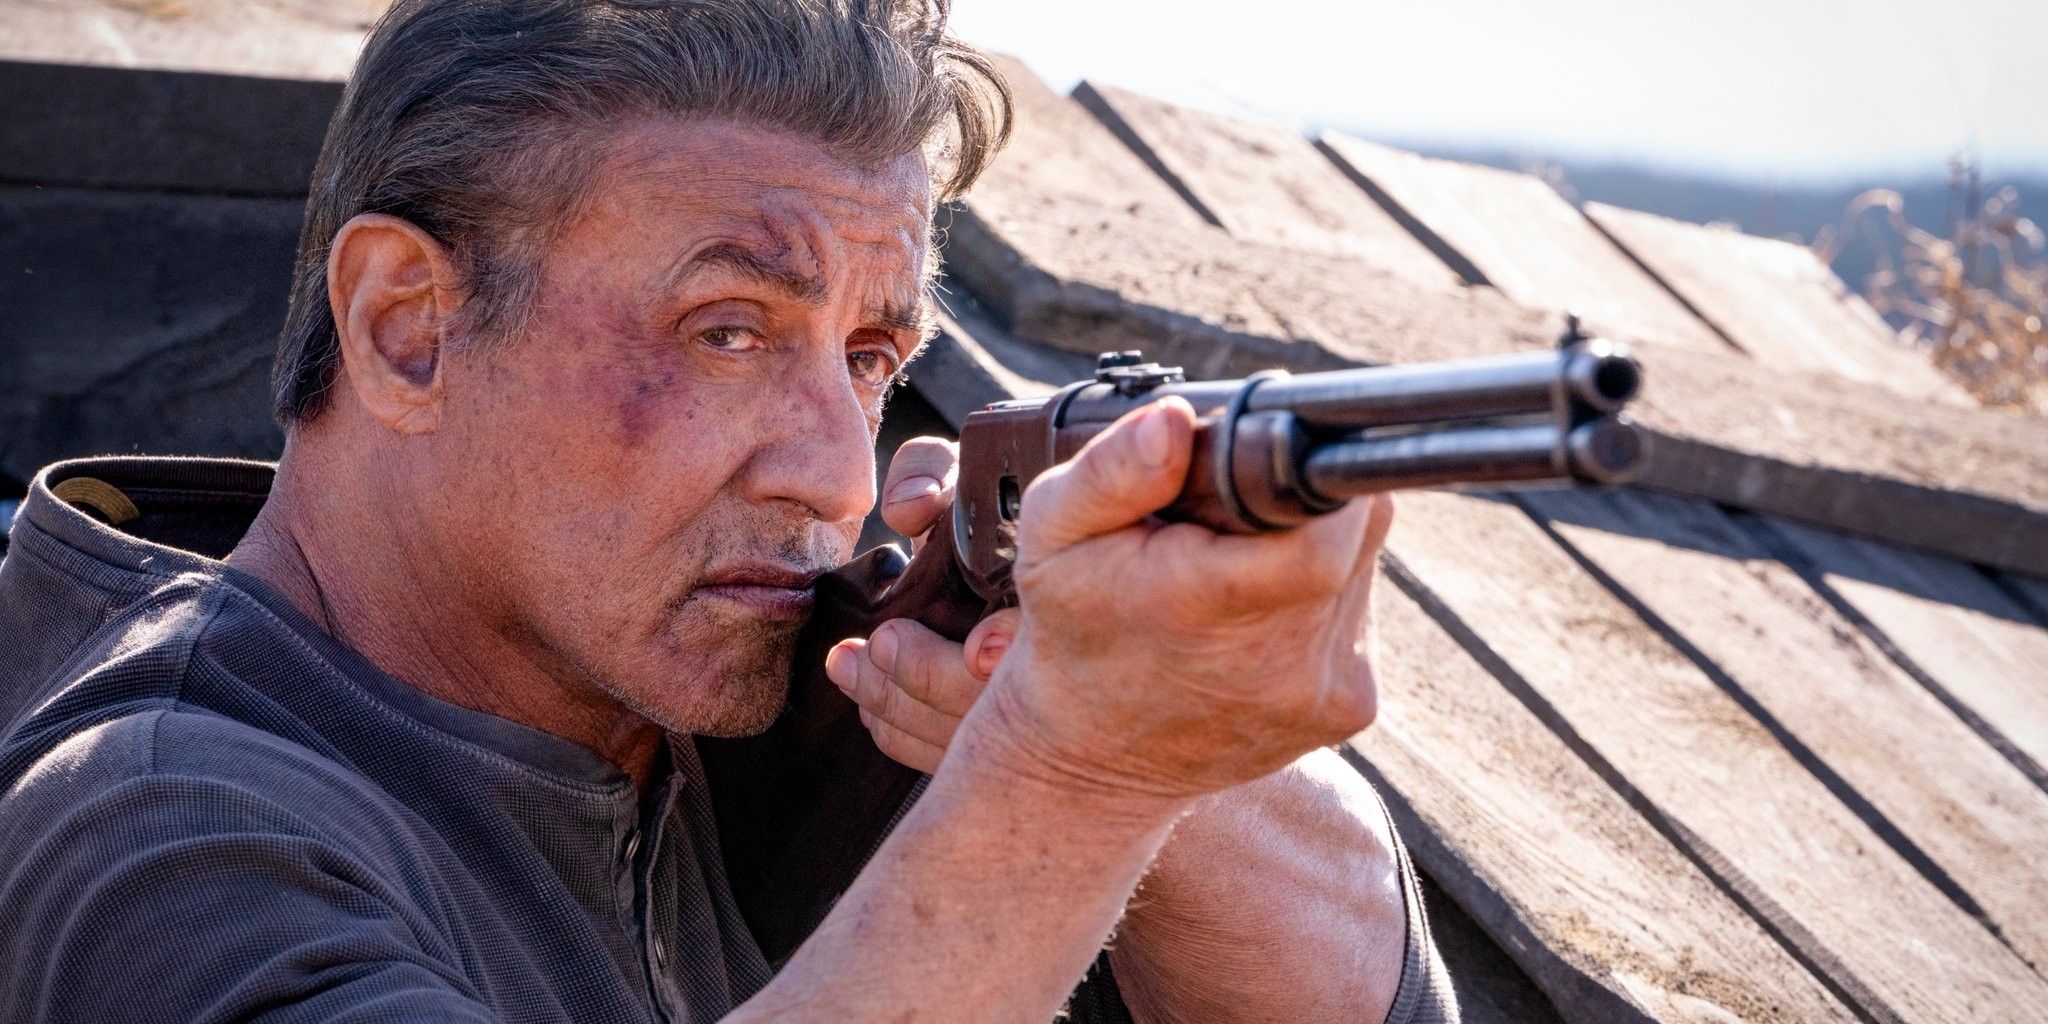 Sylvester Stallone in Rambo Last Blood